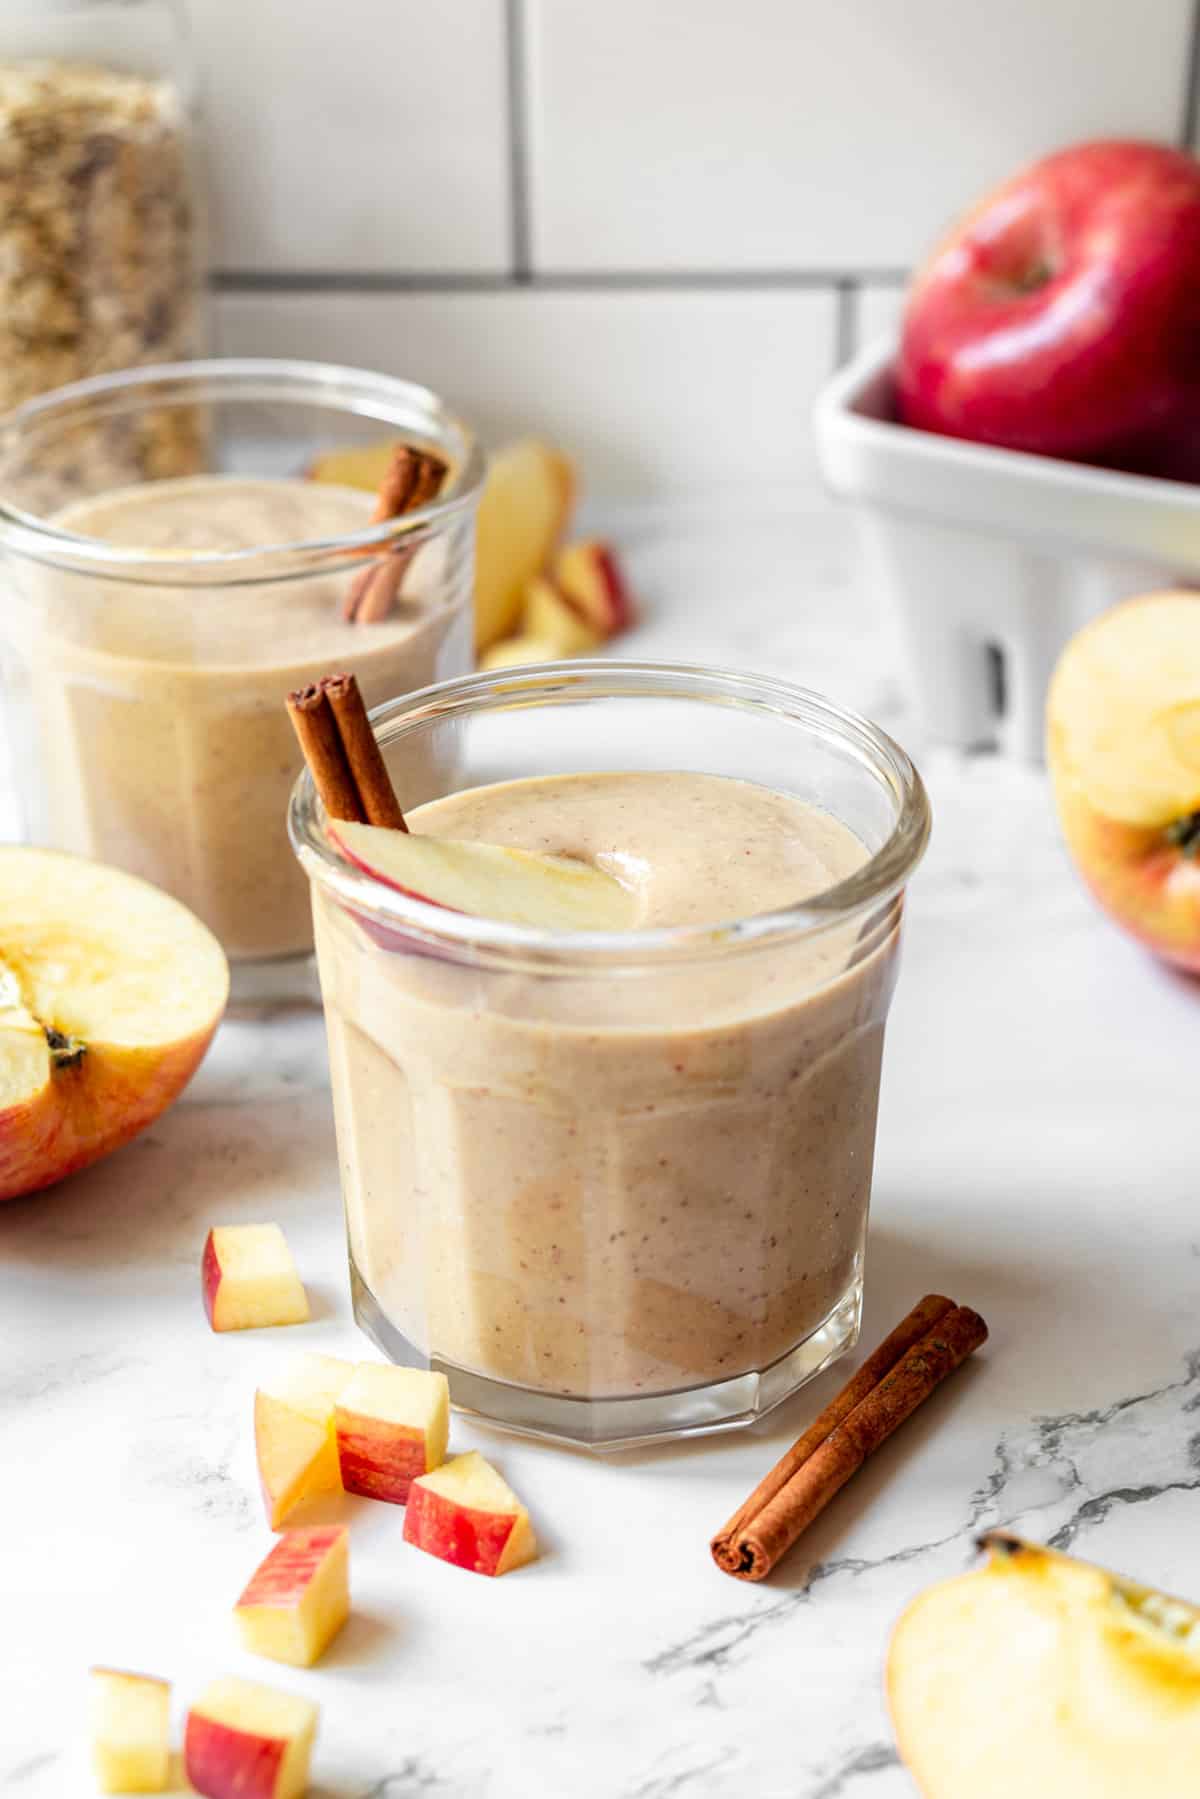 An apple and banana smoothie served in a small glass and garnished with a slice of apple and a cinnamon stick.